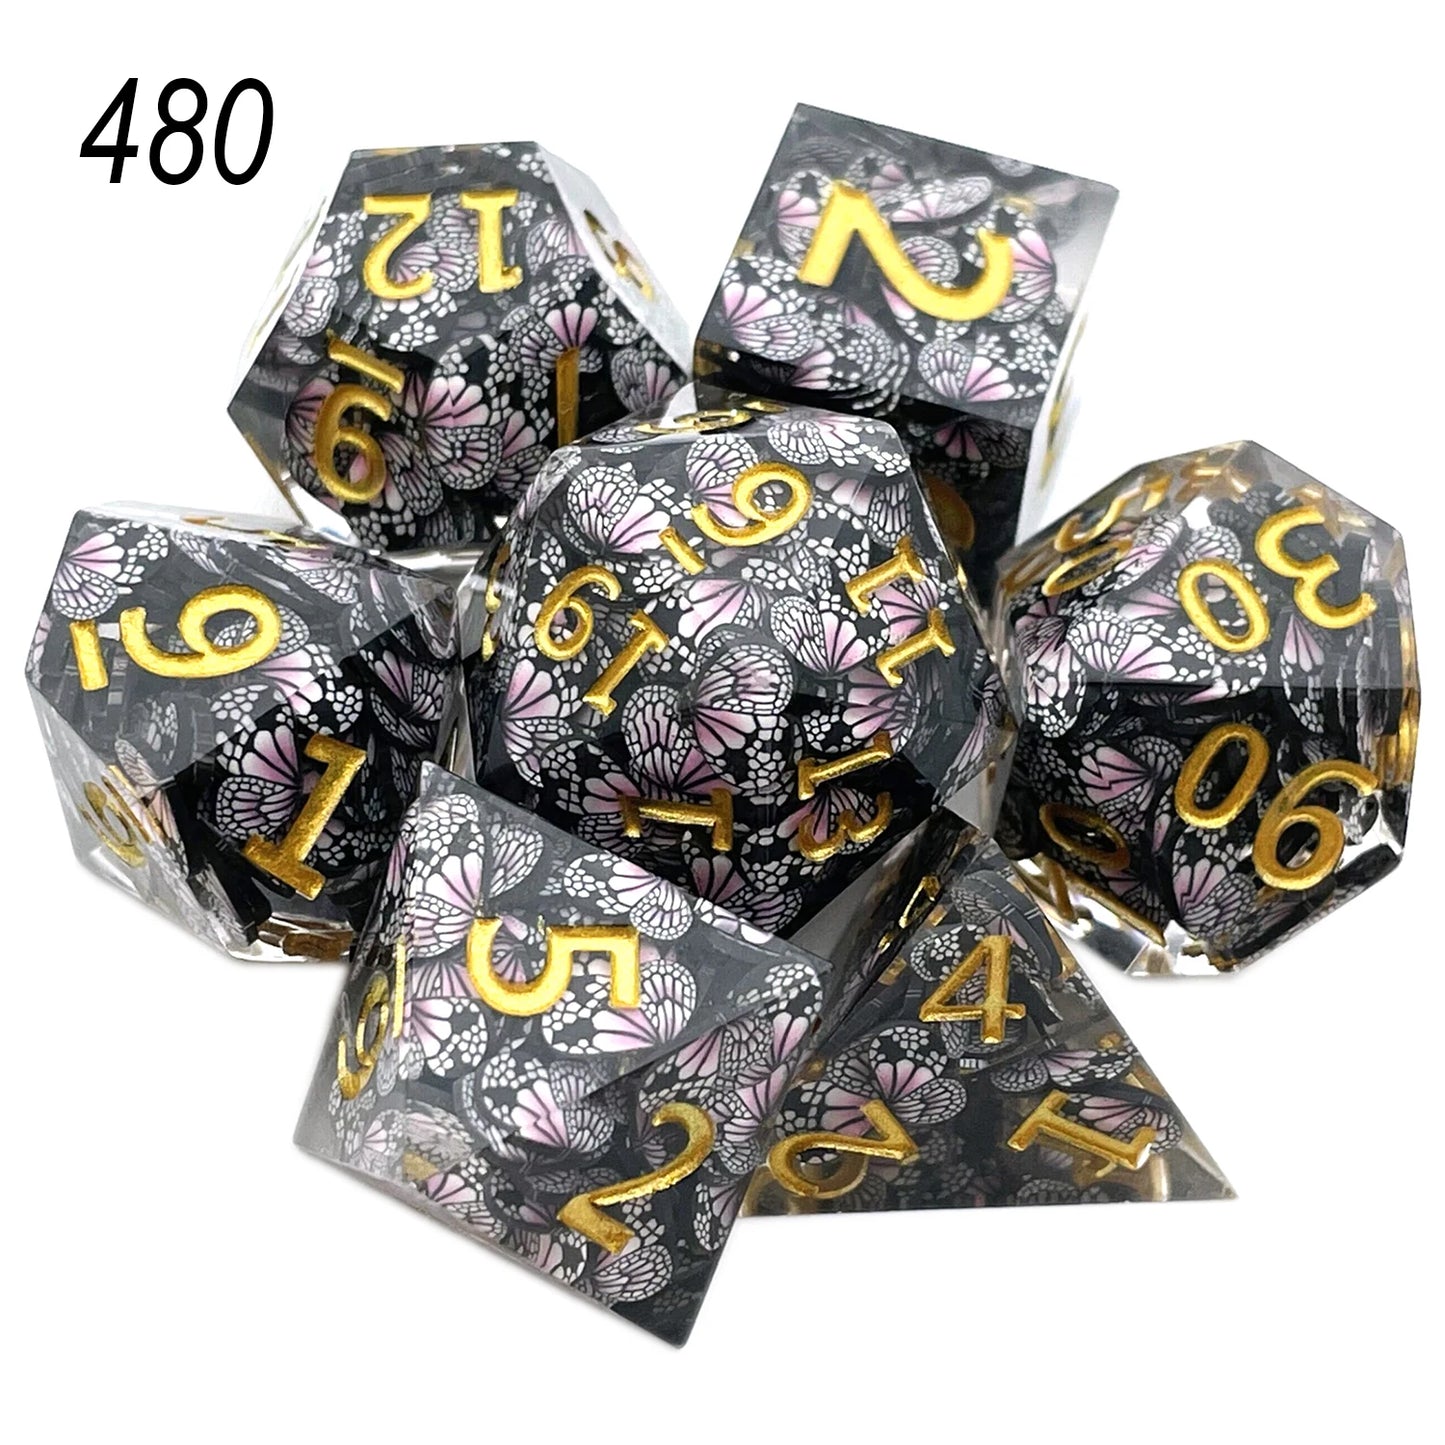 Solid Polyhedral Dice for Role Playing, Resin Dice, Dragon Scale, D, Rpg, Rol, Pathfinder, Board Game, Gifts, 7PCs, 2023 480